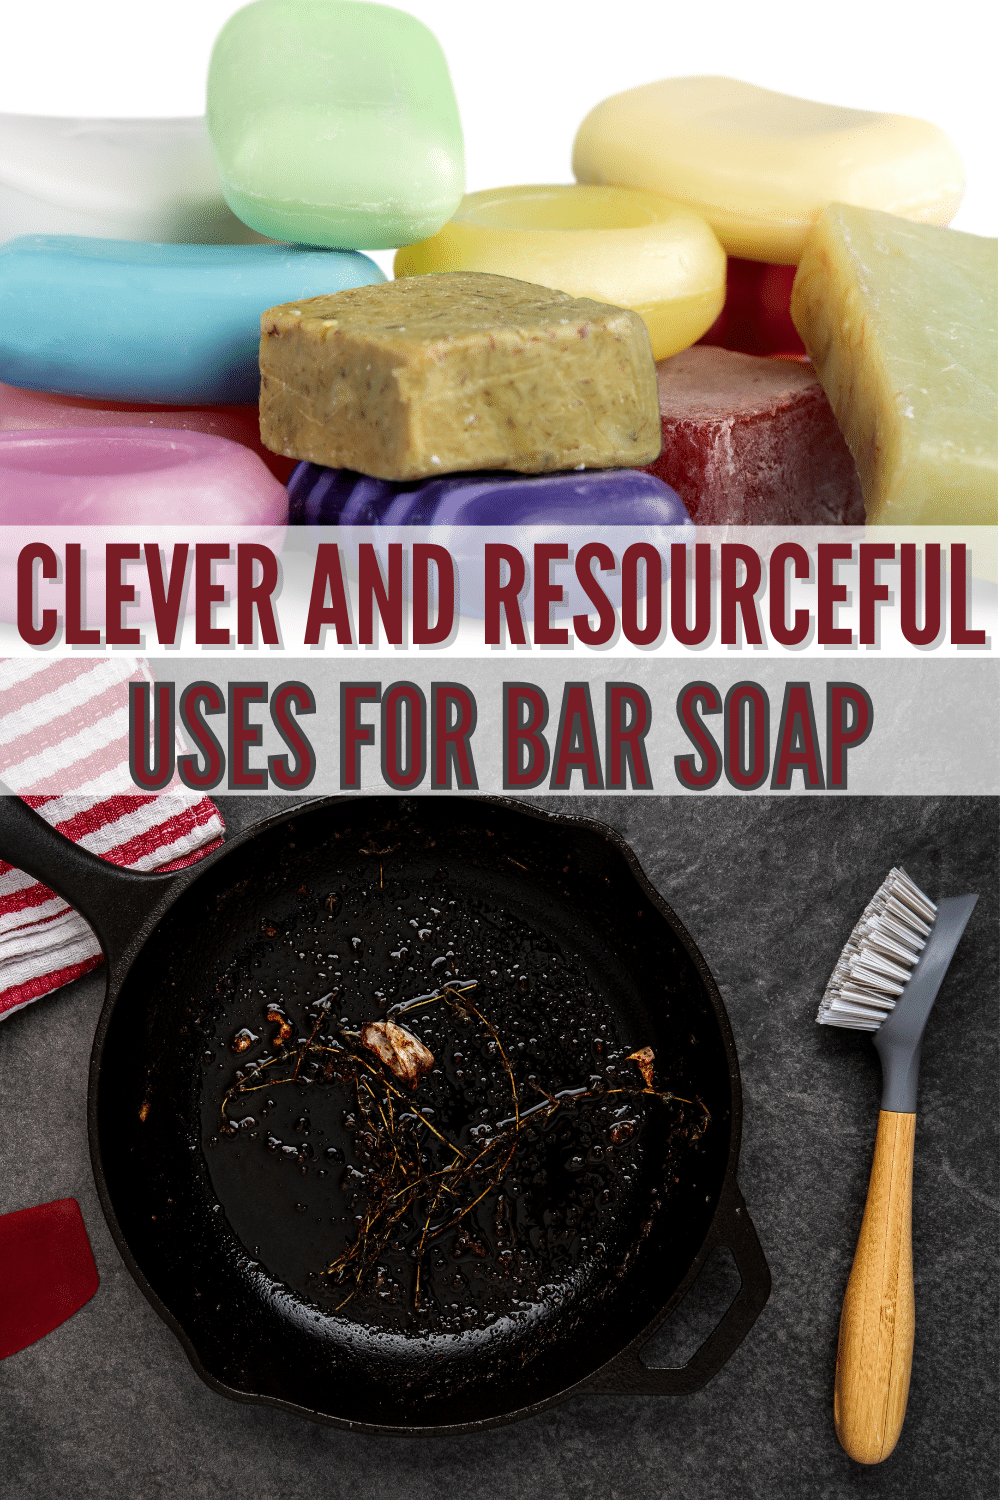 Did you know that bar soap is good for a lot more than cleaning? Check out all of these clever uses for bar soap. #lifehacks #barsoap via @wondermomwannab